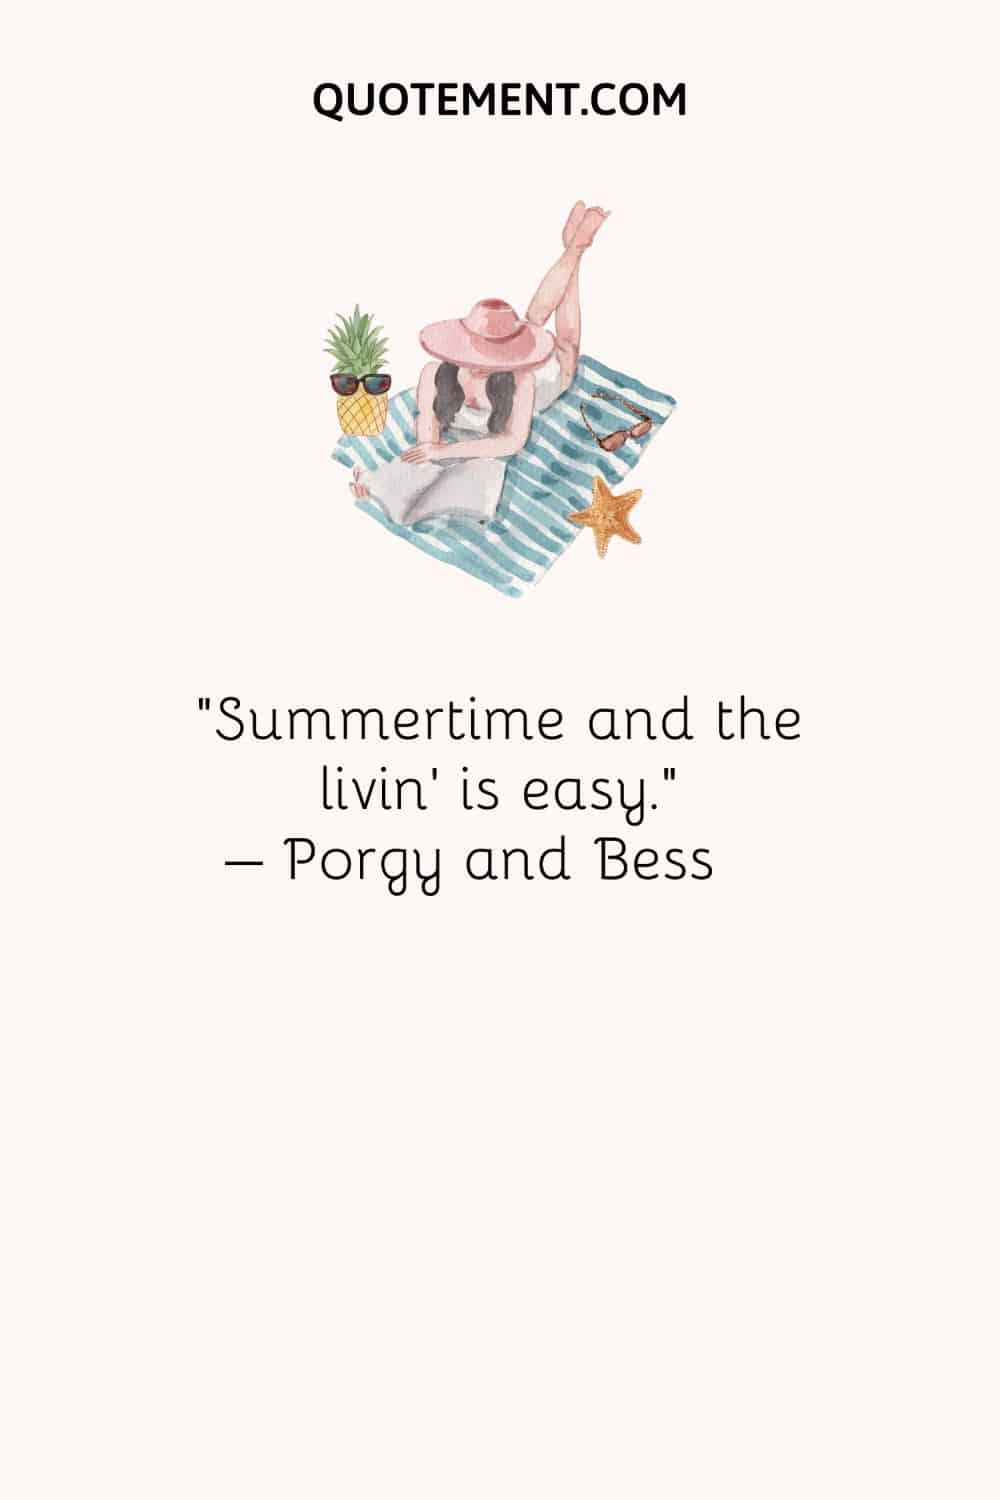 Summertime and the livin’ is easy. – Porgy and Bess